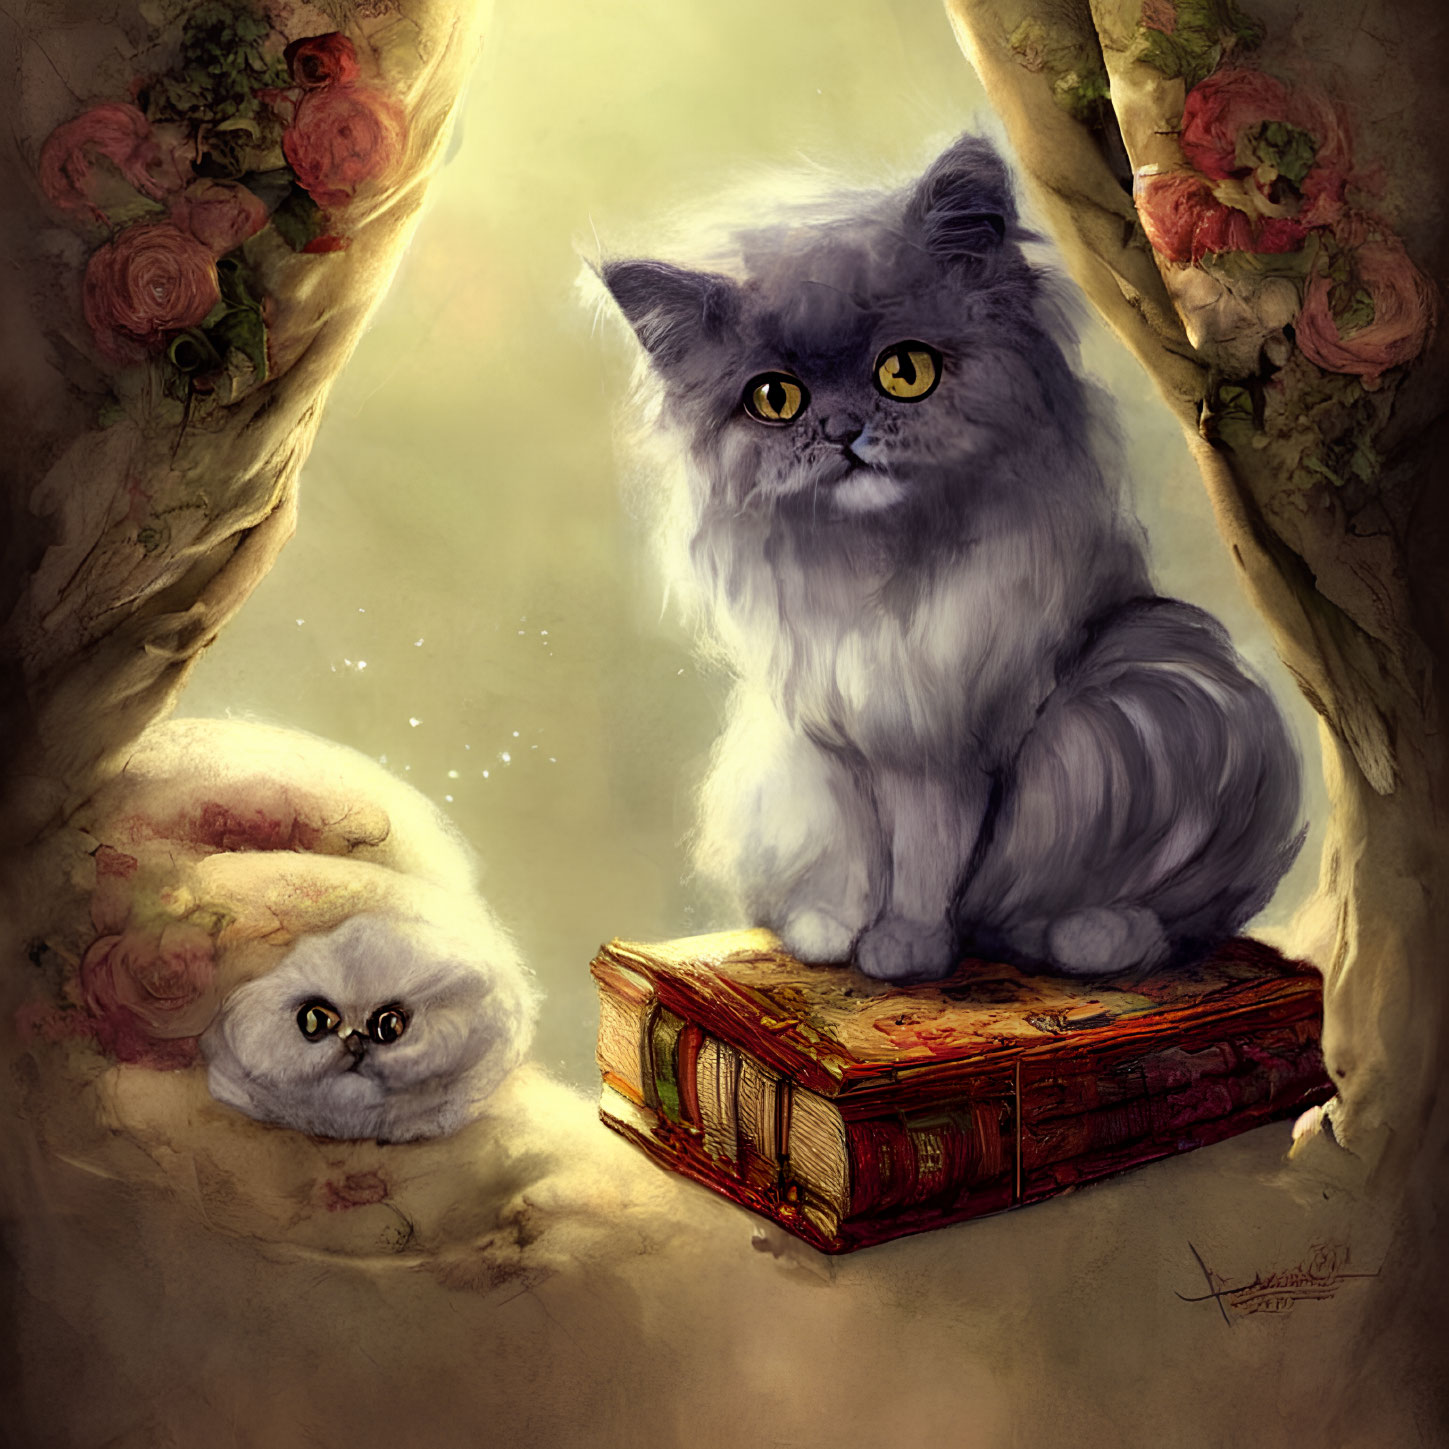 Fluffy gray cat with yellow eyes on red book with white creature and roses